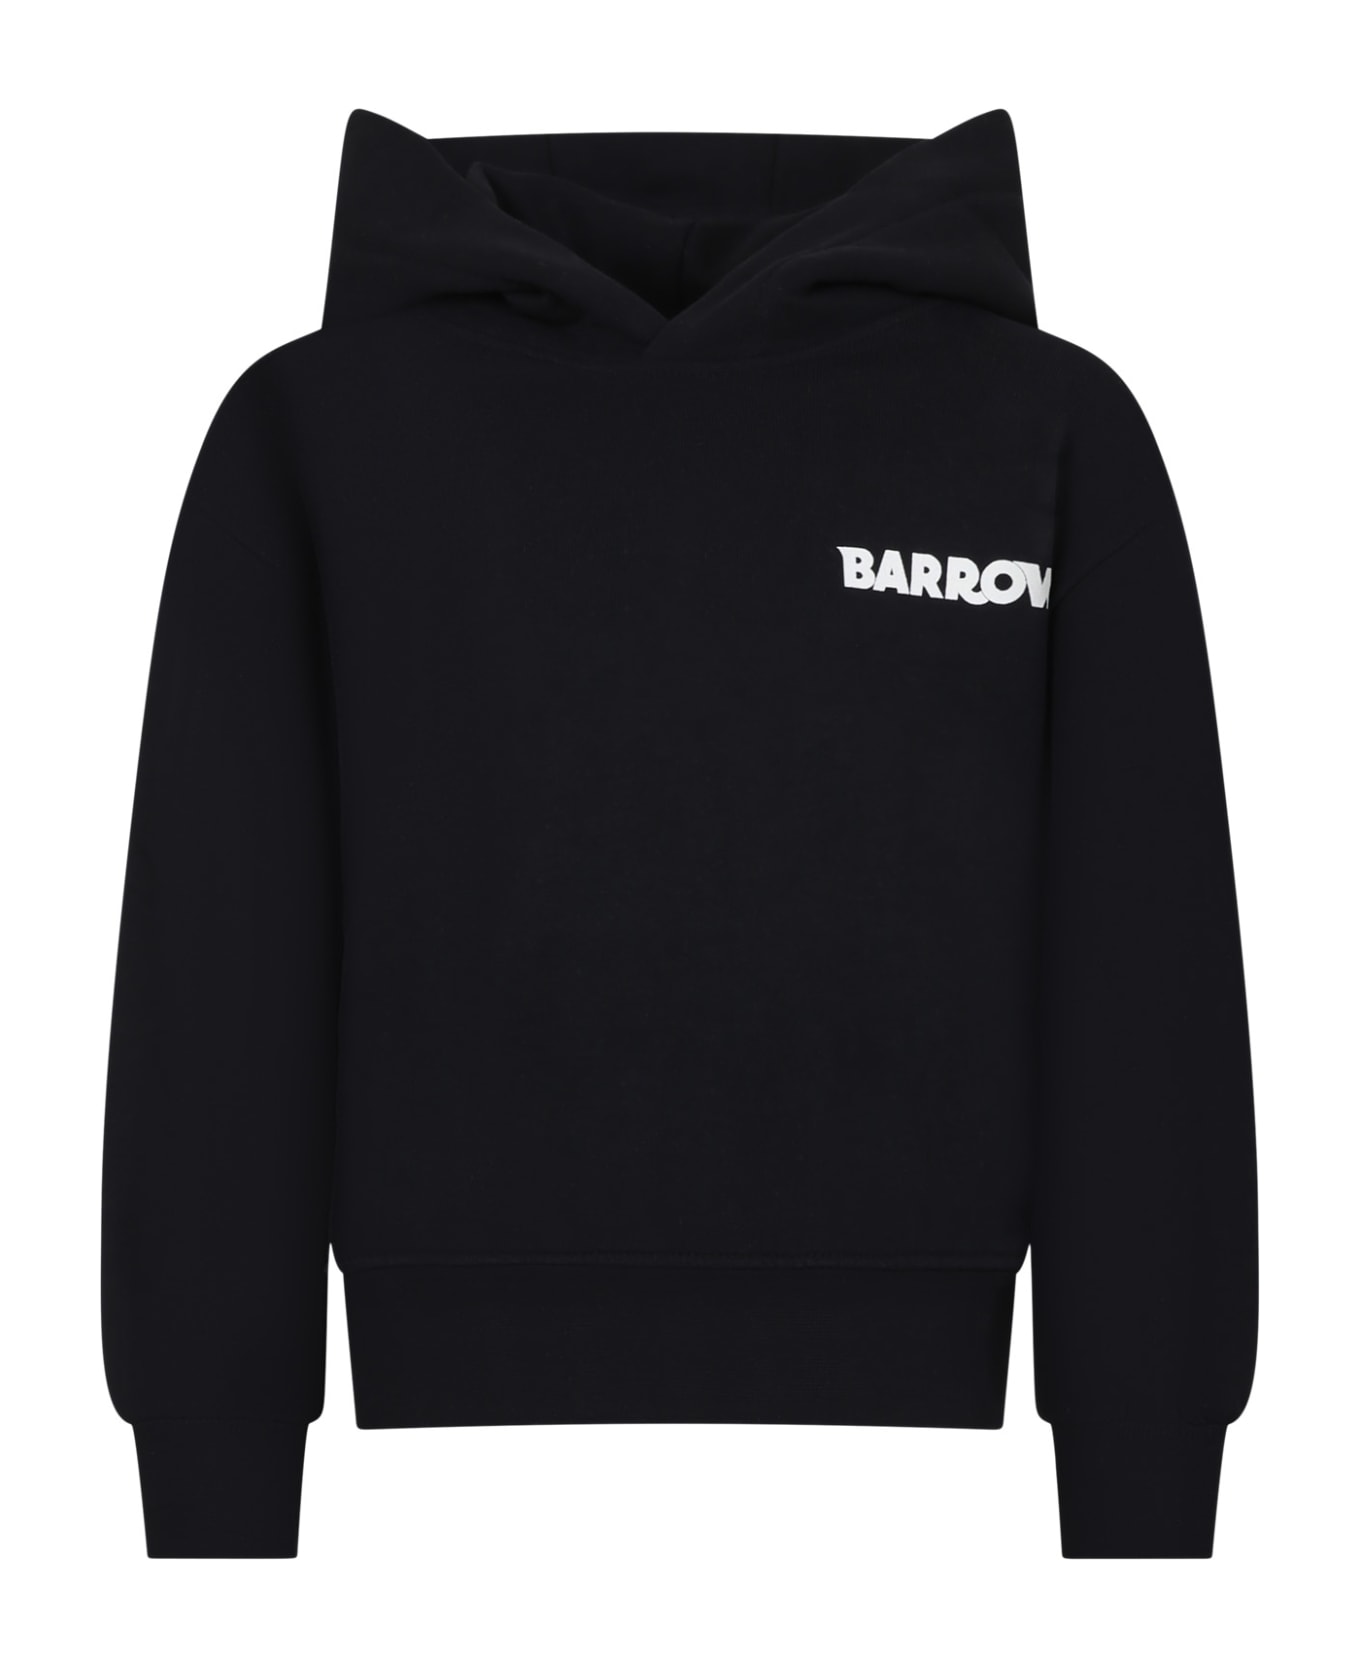 Barrow Black Sweatshirt For Kids With Logo And Iconic Smiley Face - Black